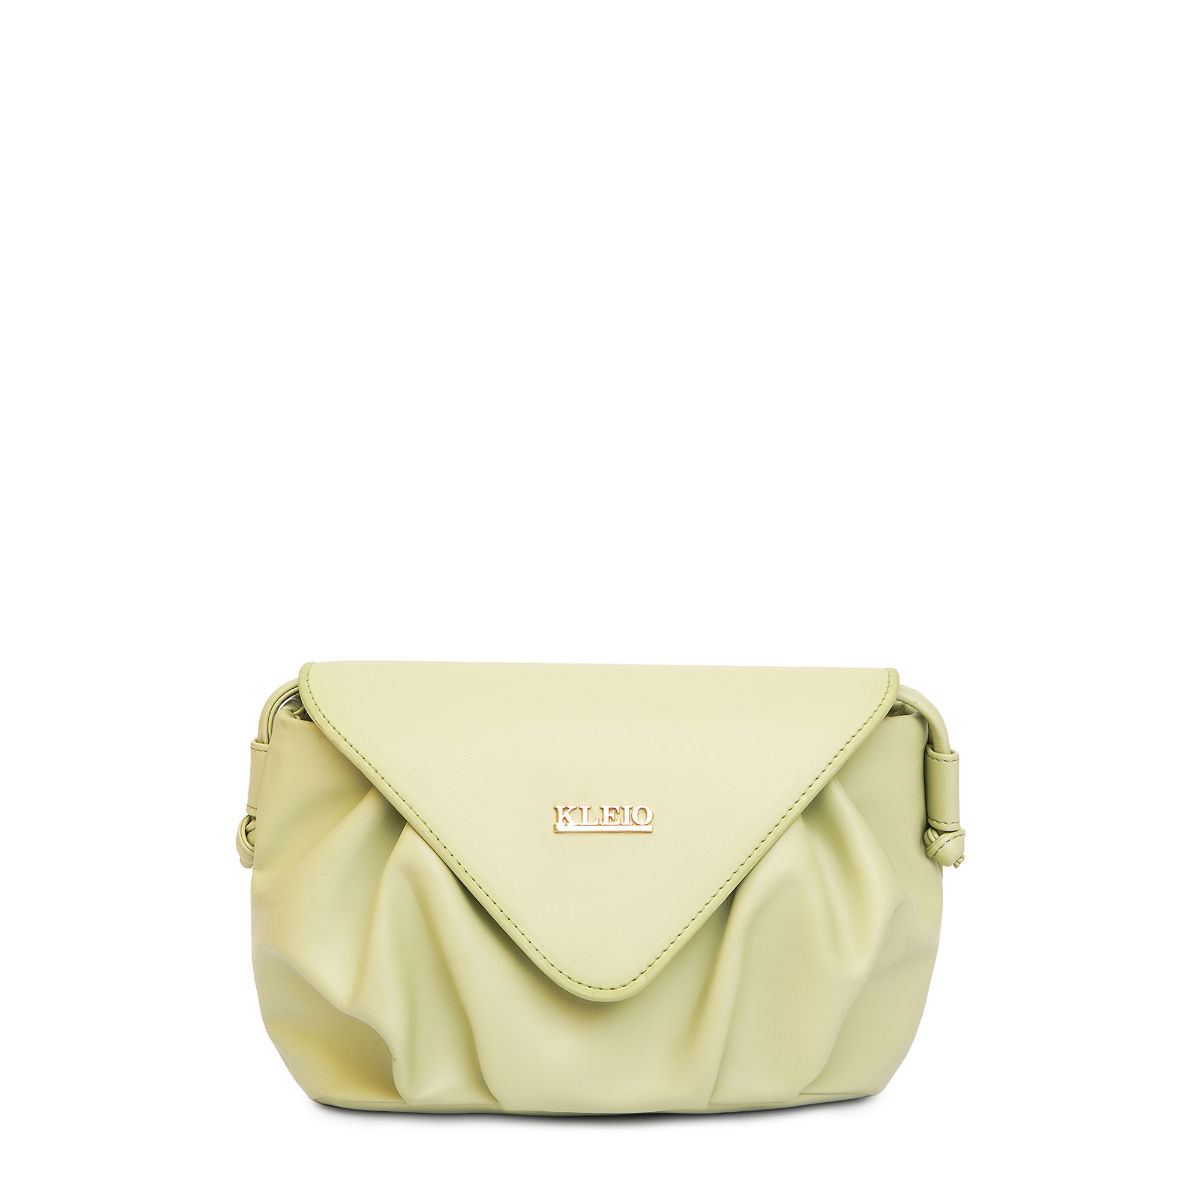 KLEIO Vegan Leather Pleated Crossbody Side Sling Bag For Women (Olive) At Nykaa, Best Beauty Products Online